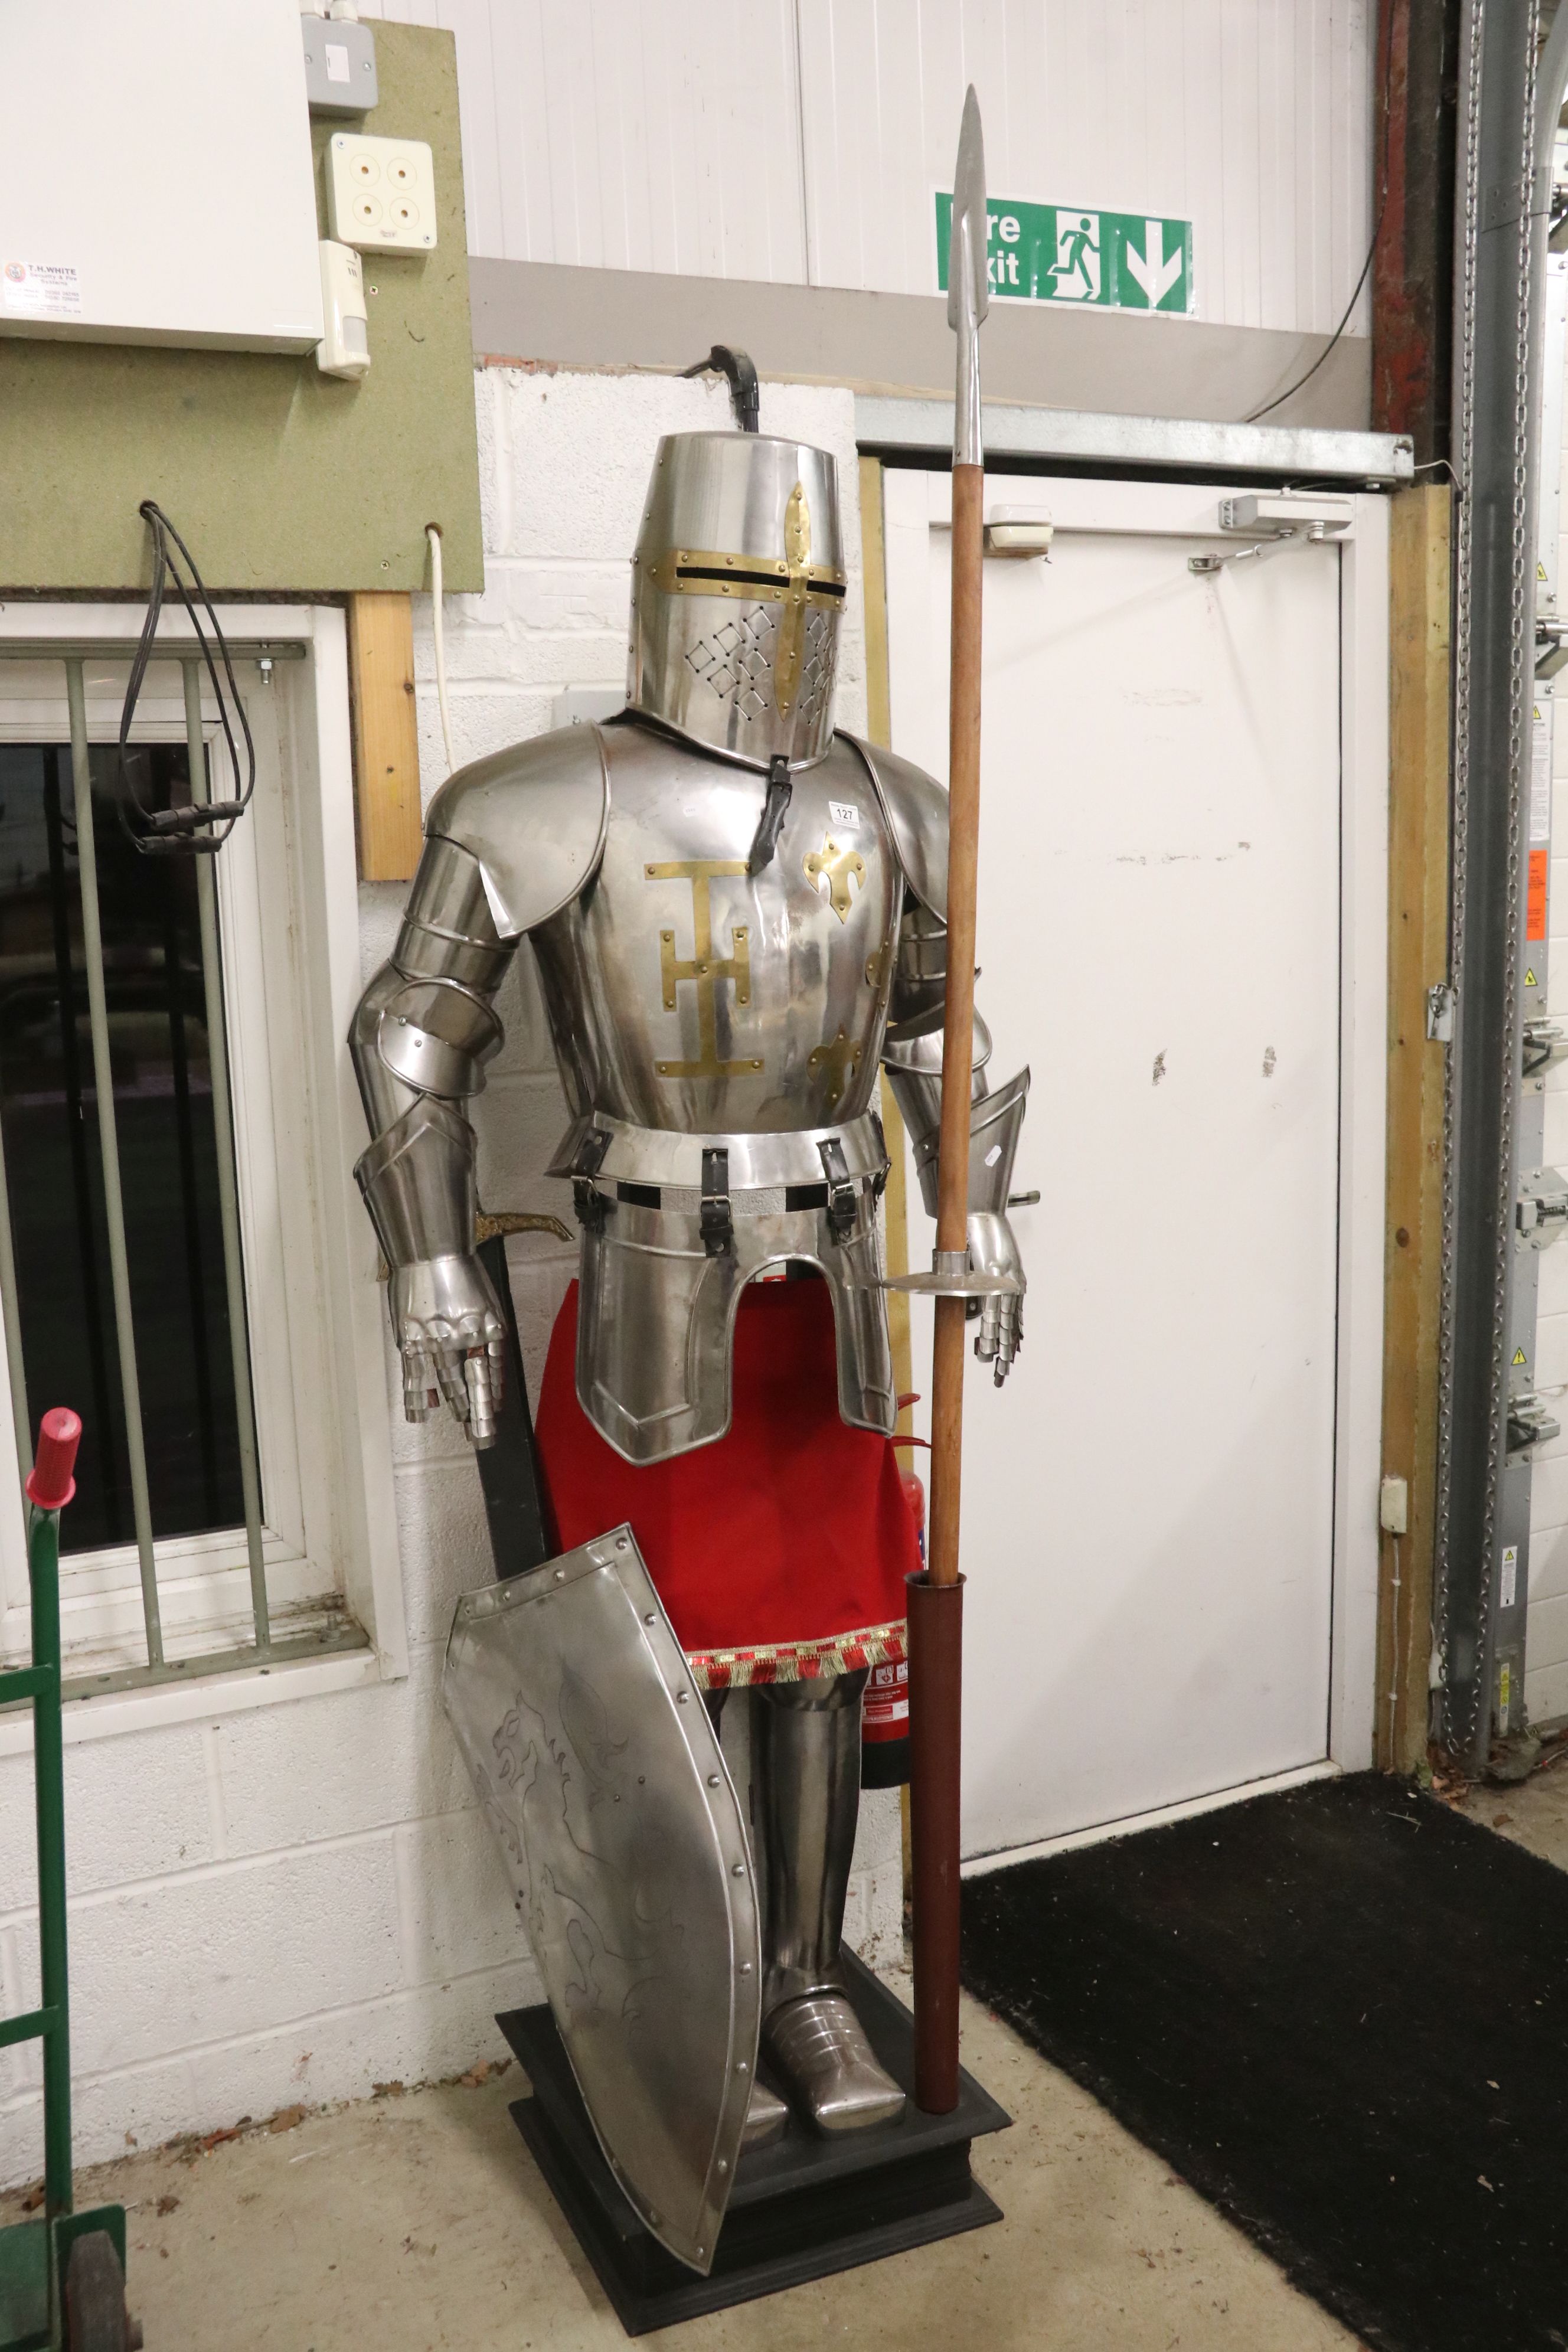 Full Size Replica Suit of Armour constructed of sheet metal, complete with a Lance, Sword in